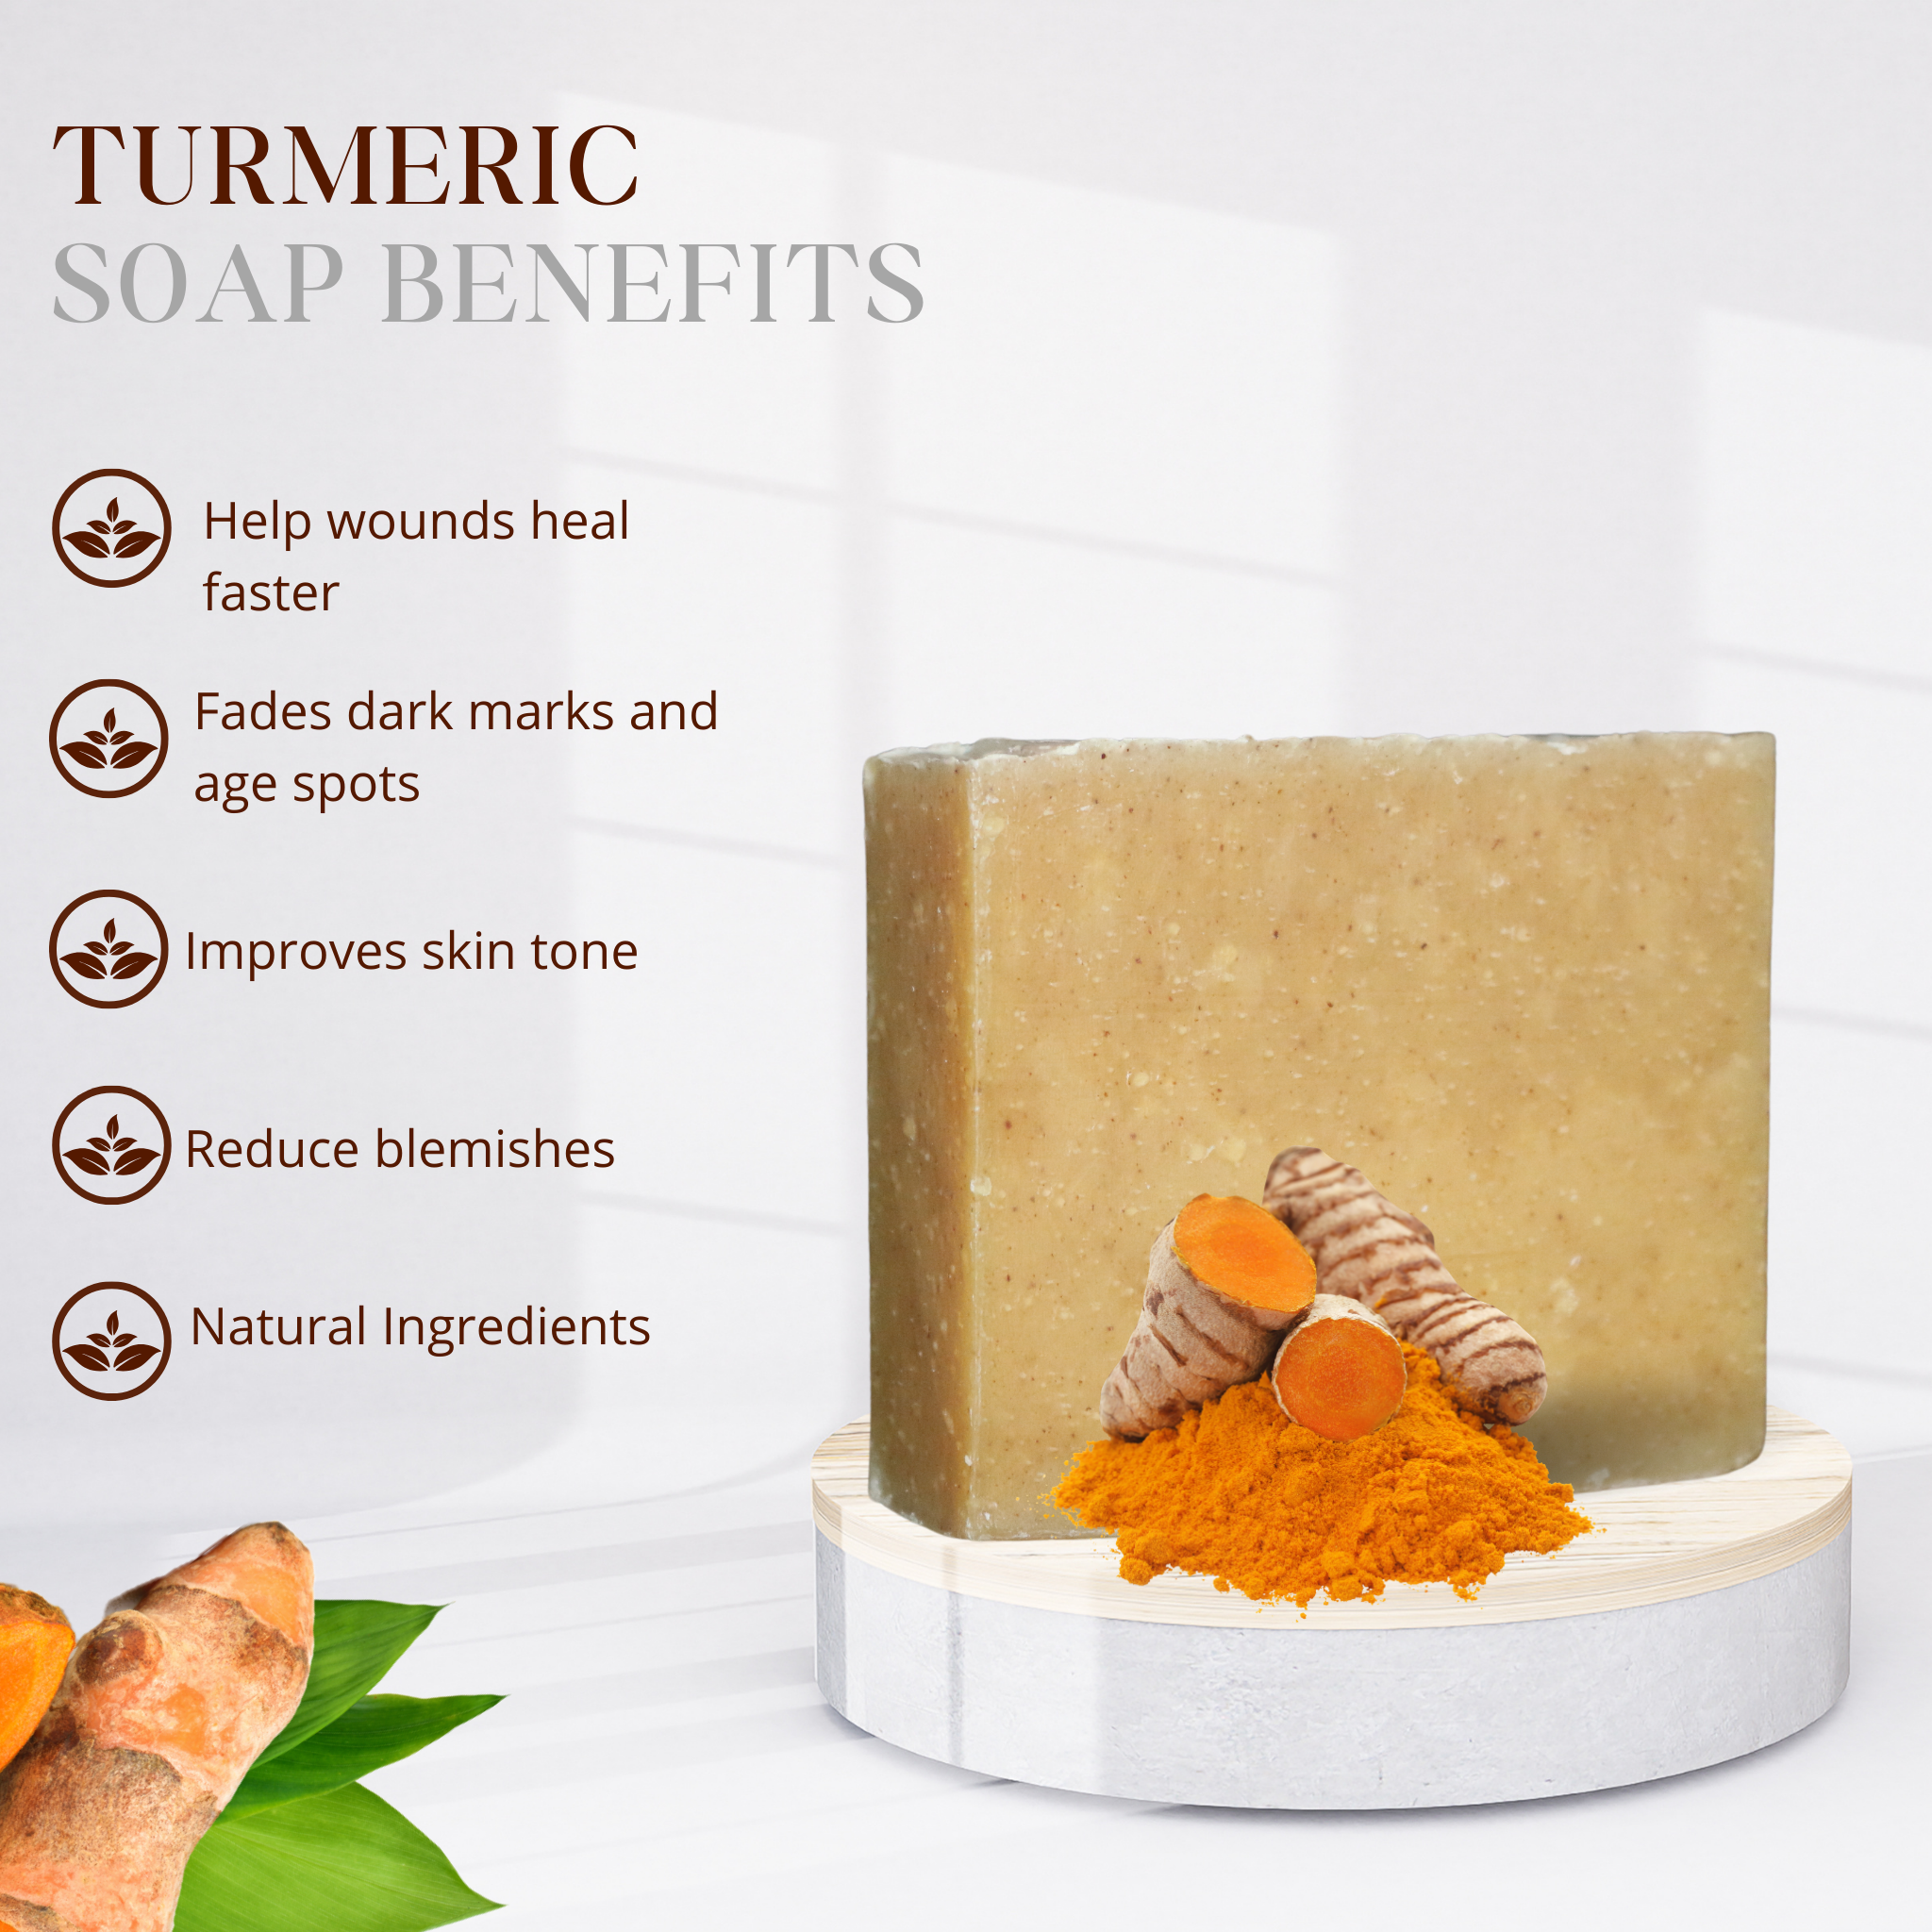 HANDMADE COLD PROCESSED TURMERIC SOAP FOR SOOTHING, BRIGHTENING SKIN